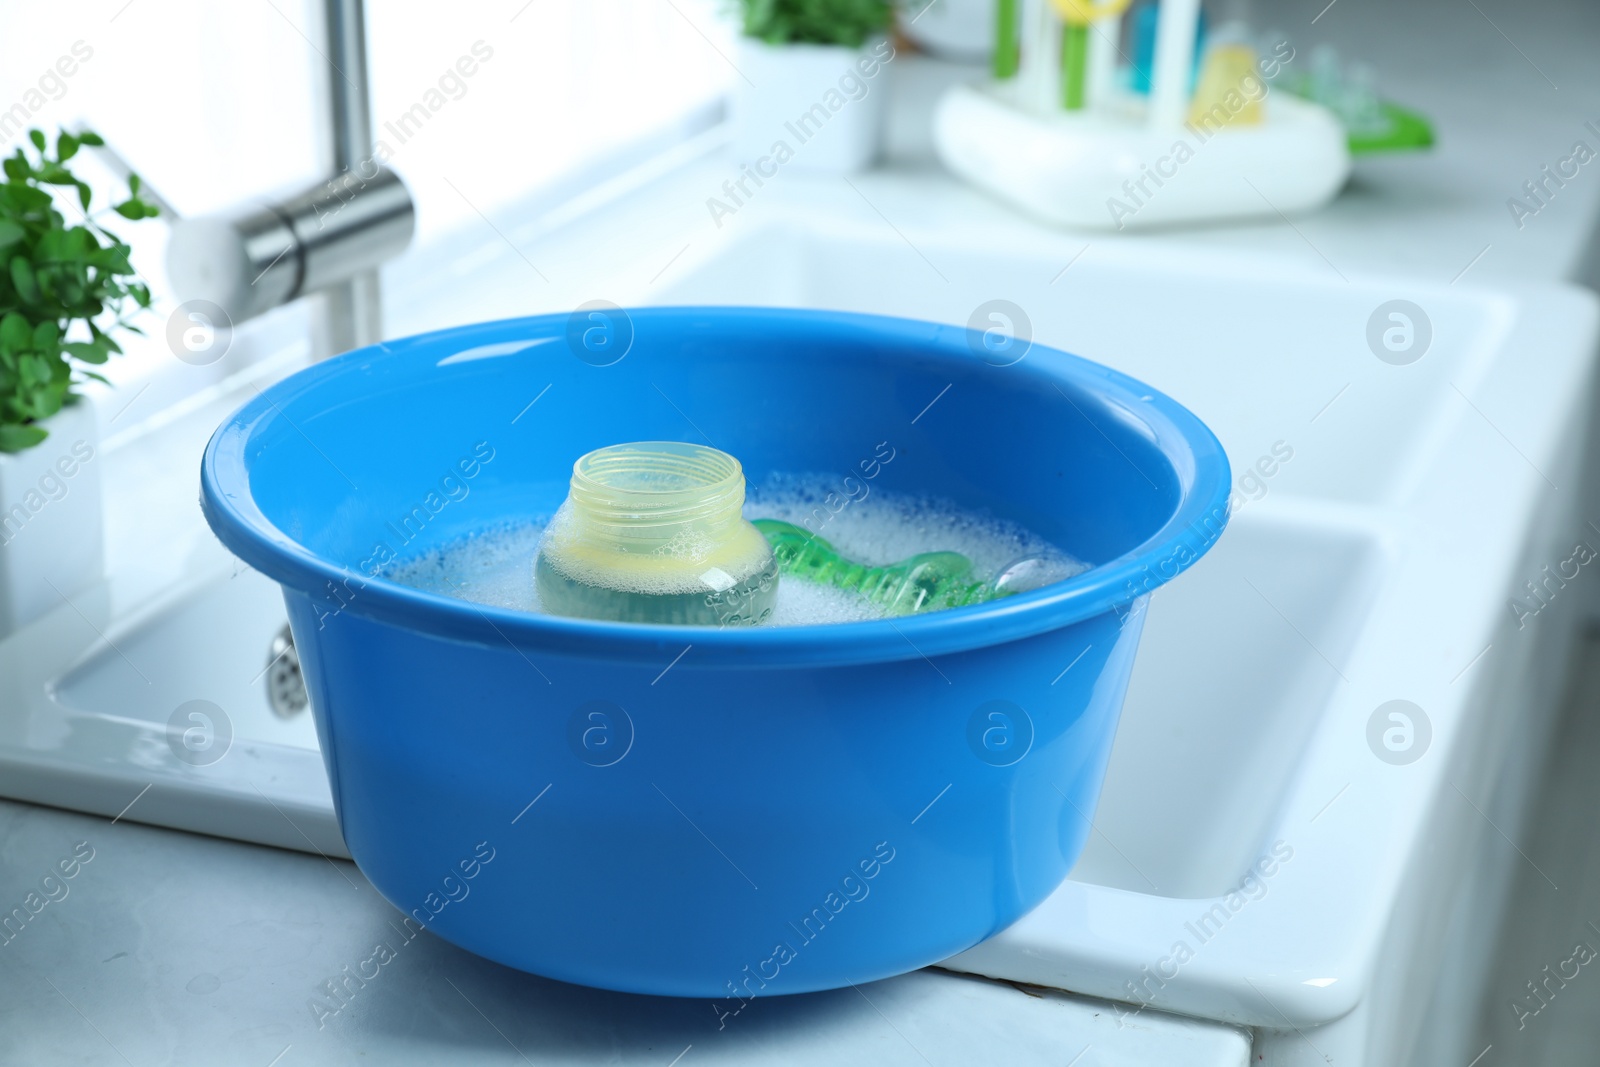 Photo of Light blue basin with baby bottles on white countertop in kitchen